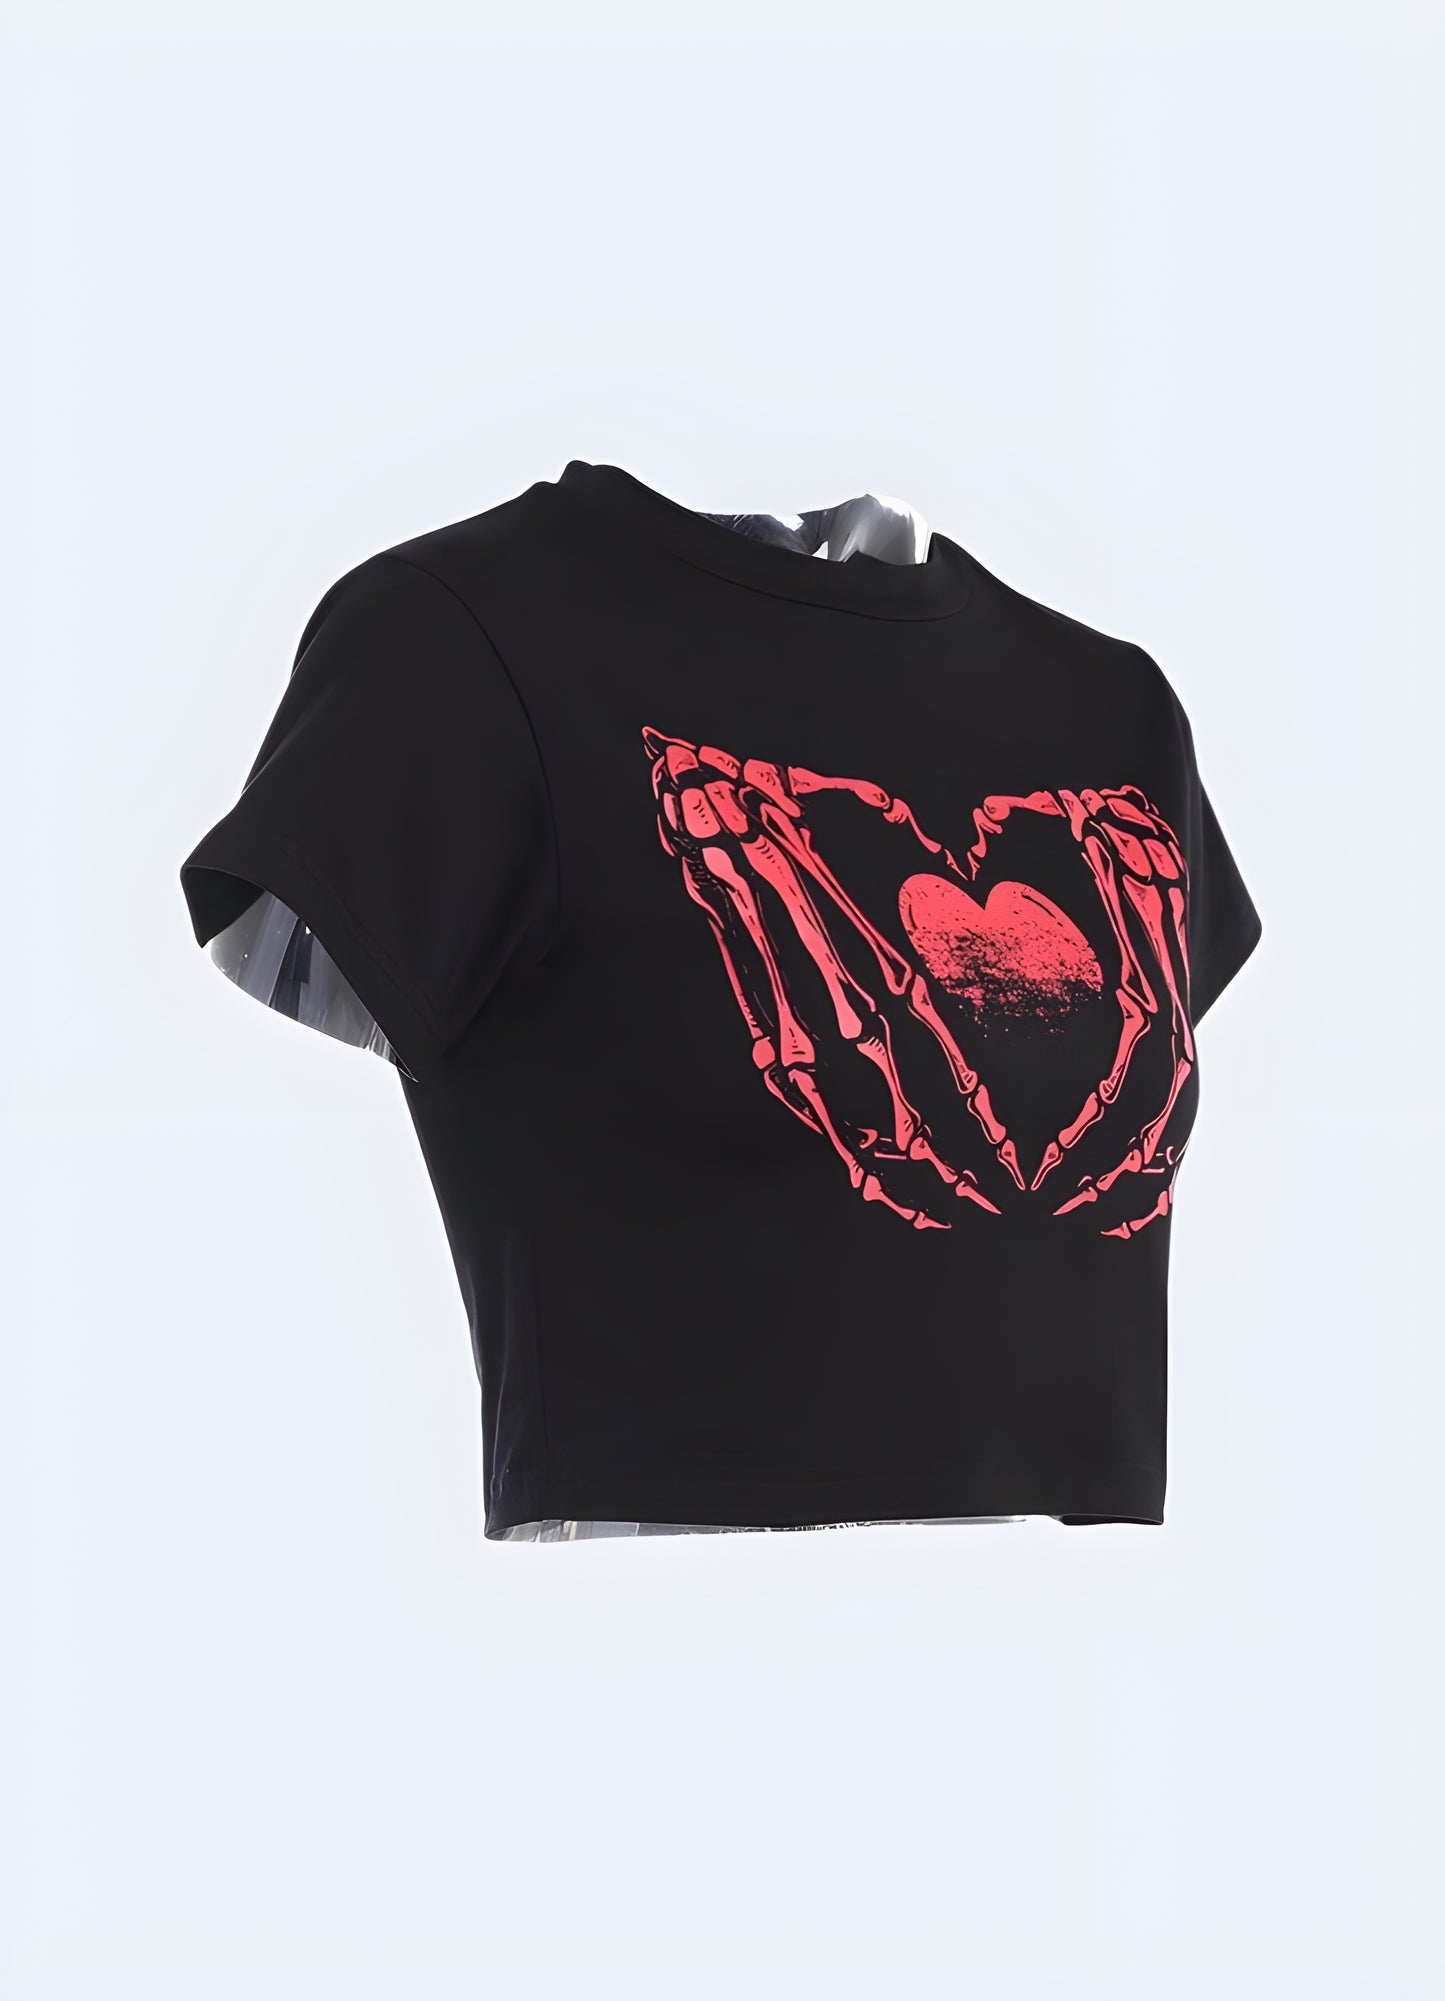 Fall in love with the gorgeous red heart t-shirt.